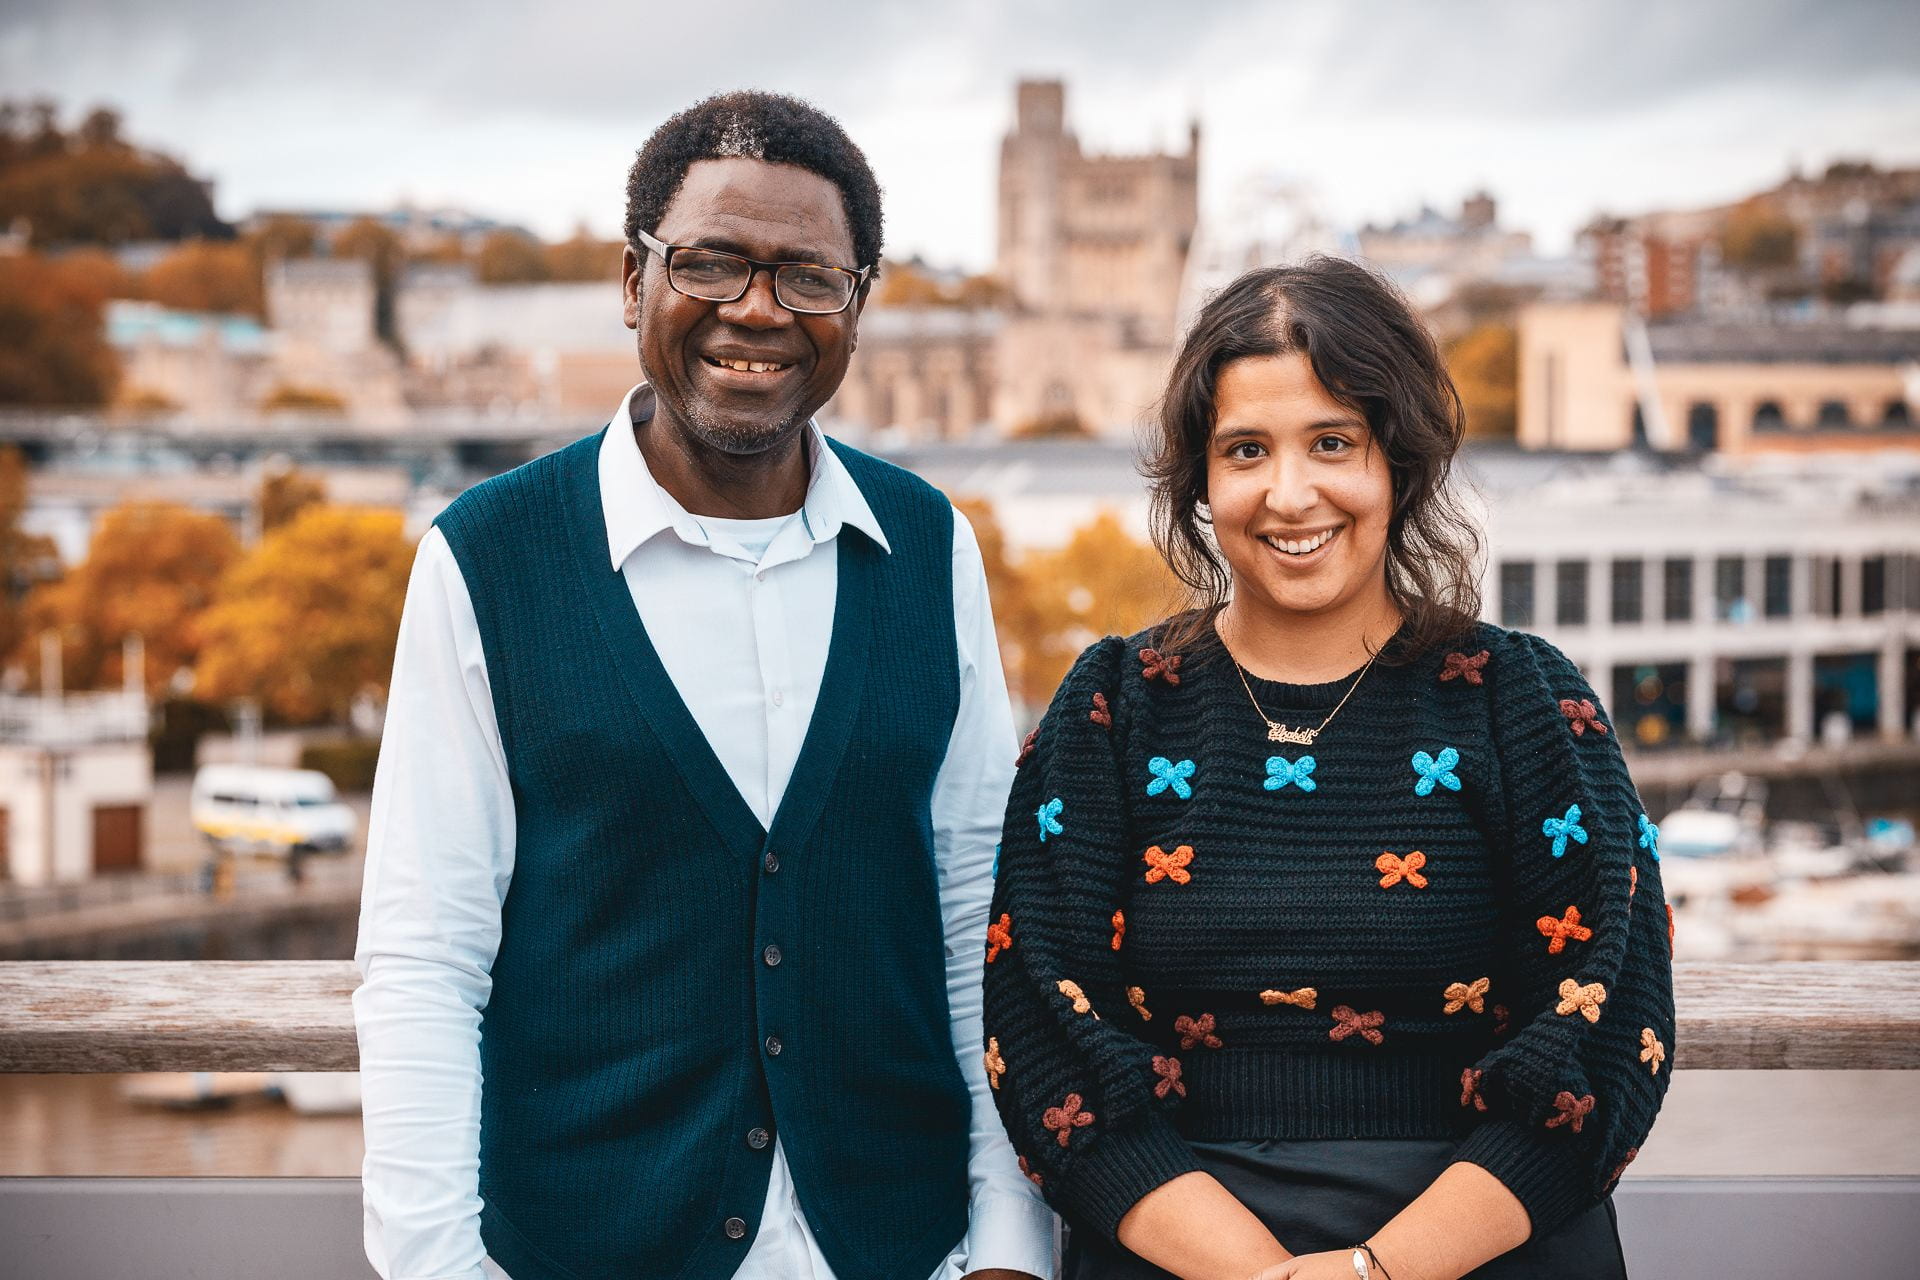 Elizabeth and Jose, Centre for Black Humanities